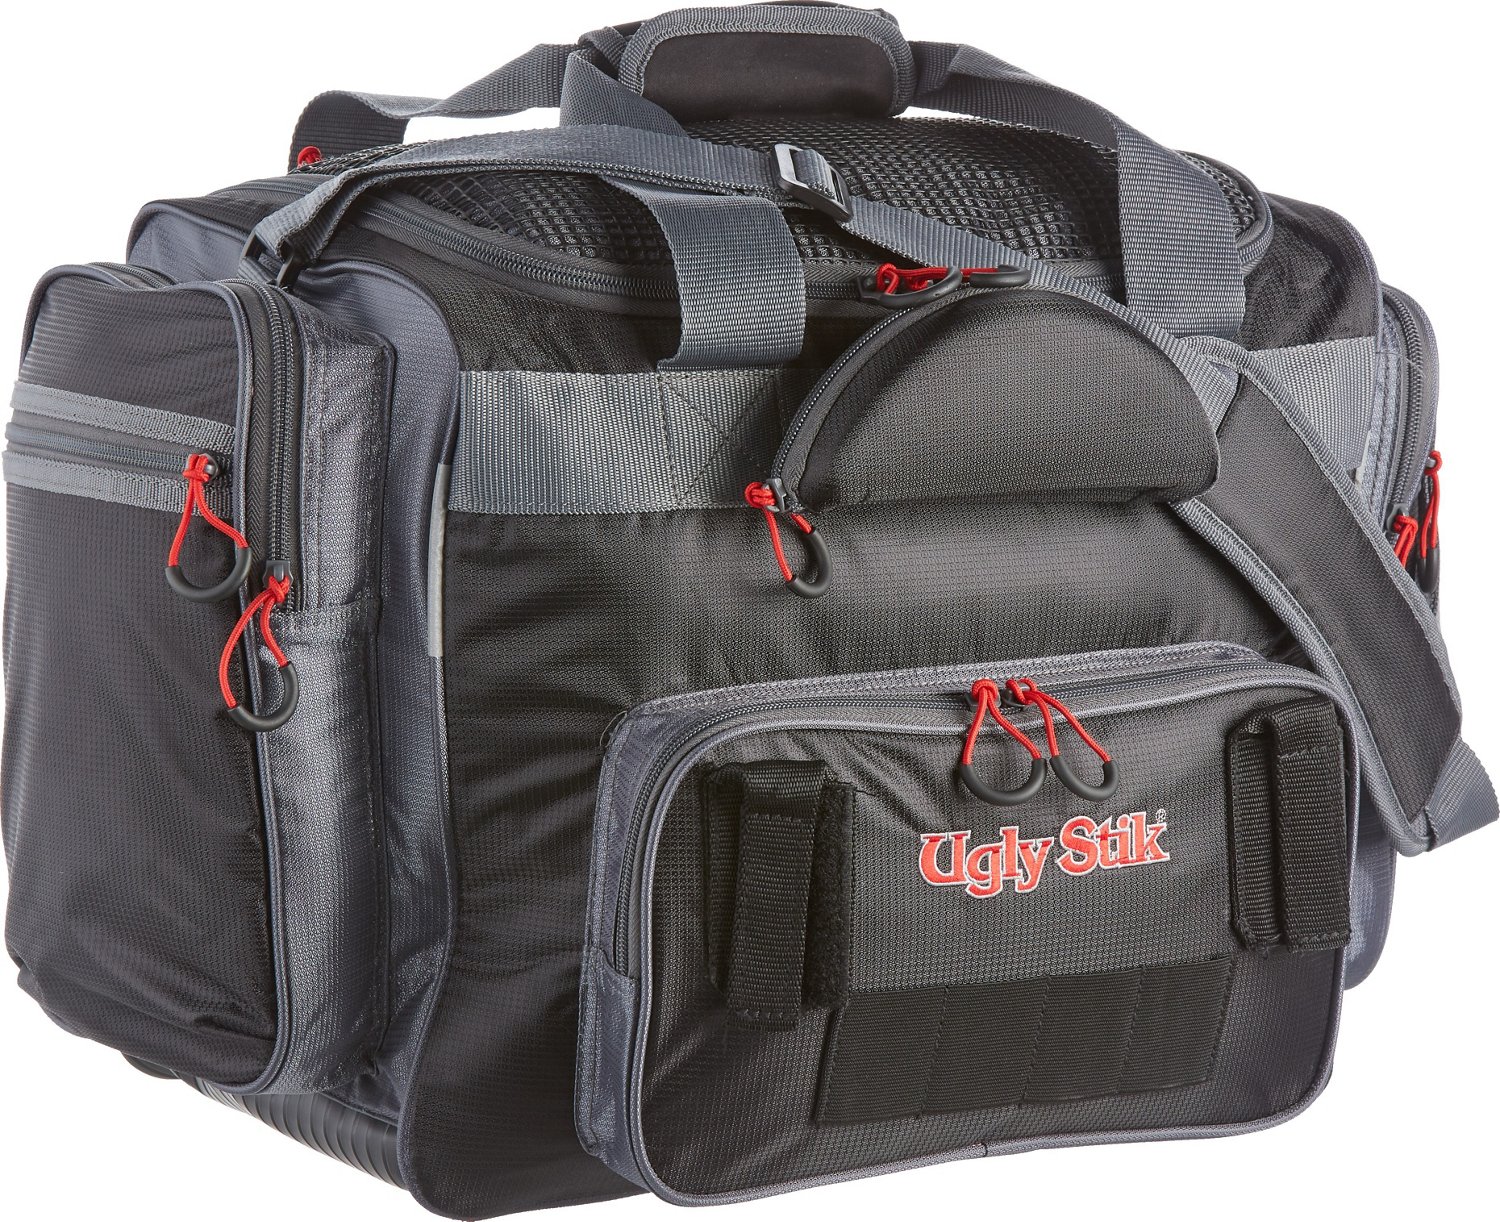 Shakespeare Ugly Stik Large Tackle Bag | Free Shipping at Academy